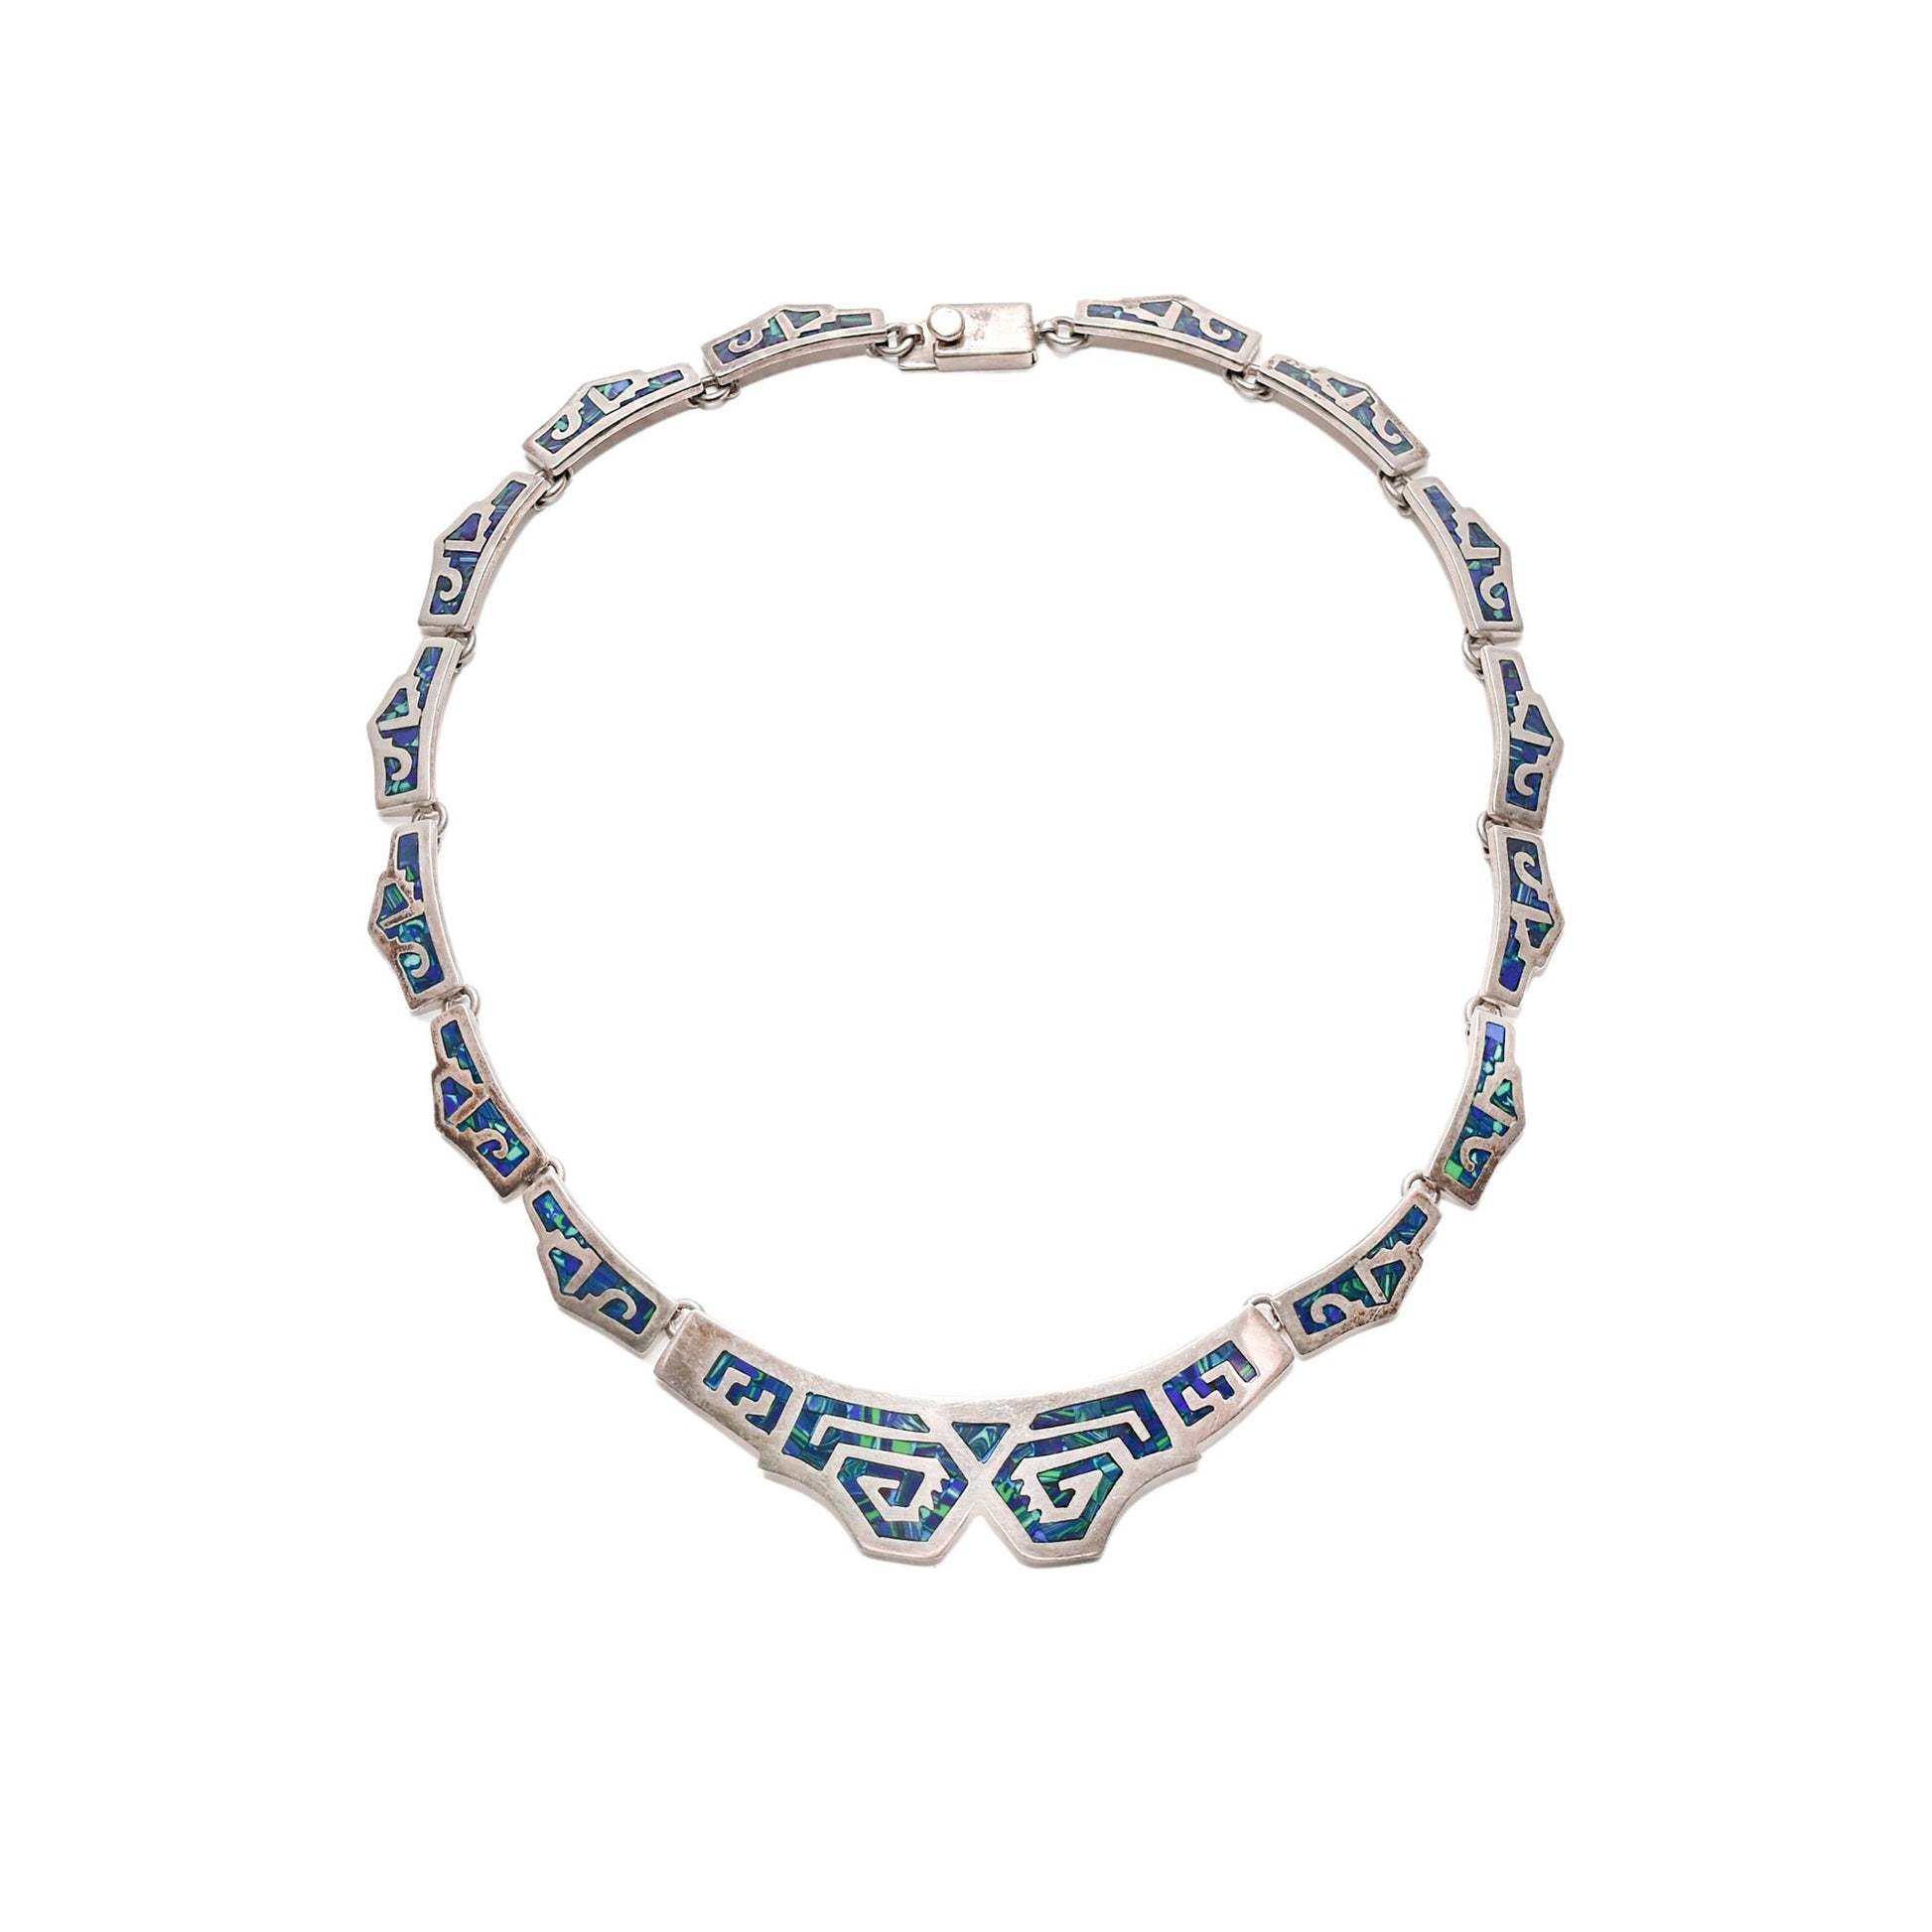 Modernist TAXCO sterling silver collar necklace with blue and green mosaic tribal inlay design, measuring 17.5 inches in length, displayed on a white background.